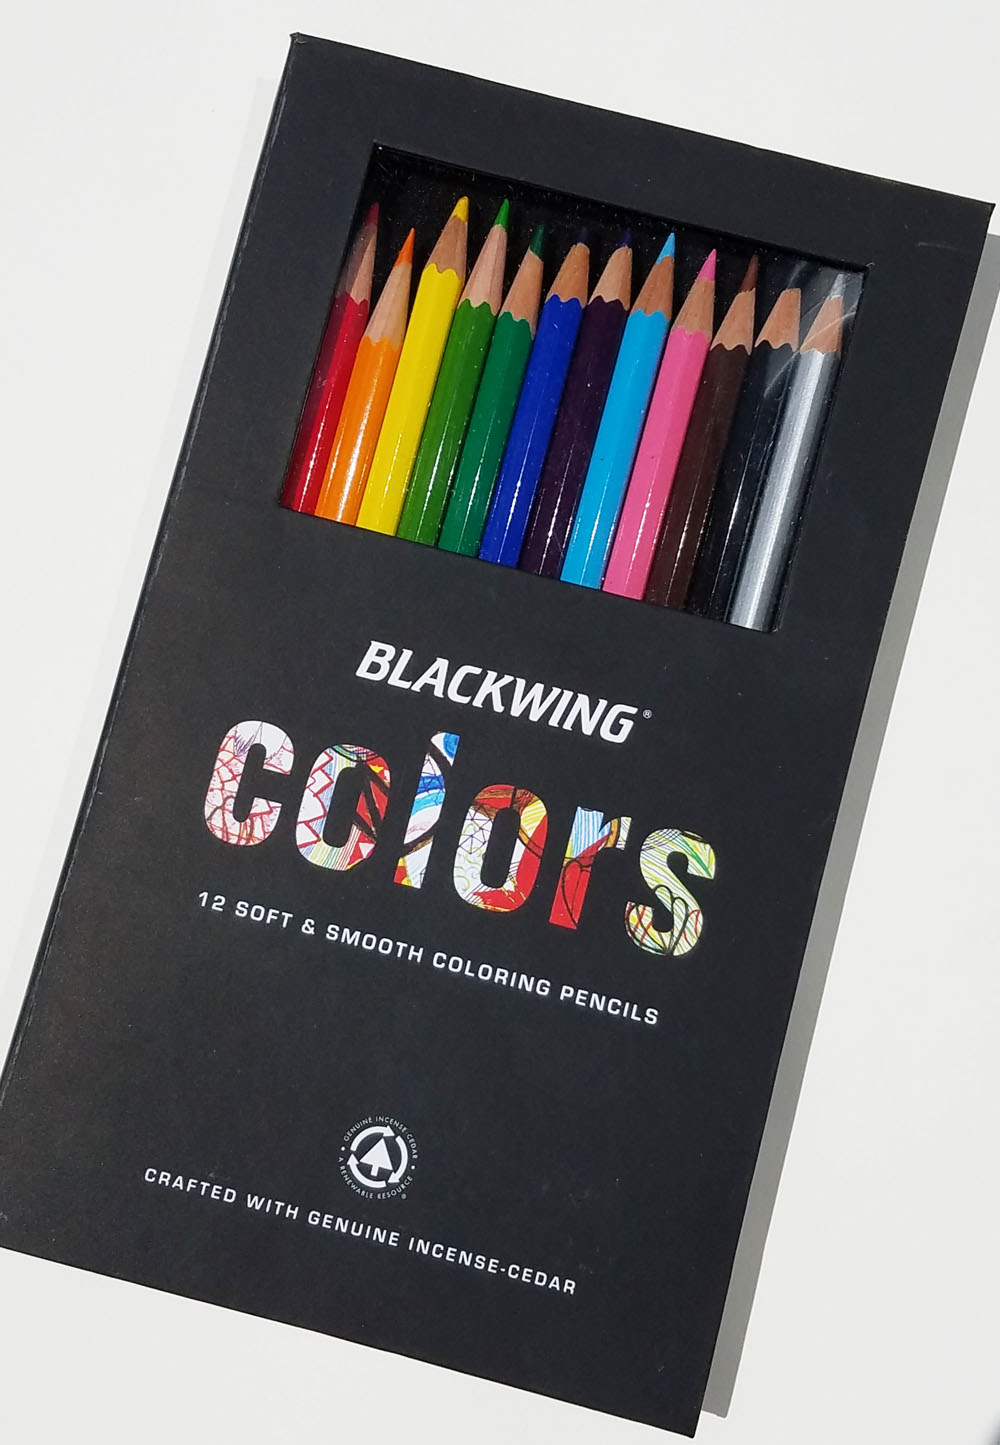 Fueled by Clouds & Coffee: Review: Be Goody Color/Graphite Bi-Pencils